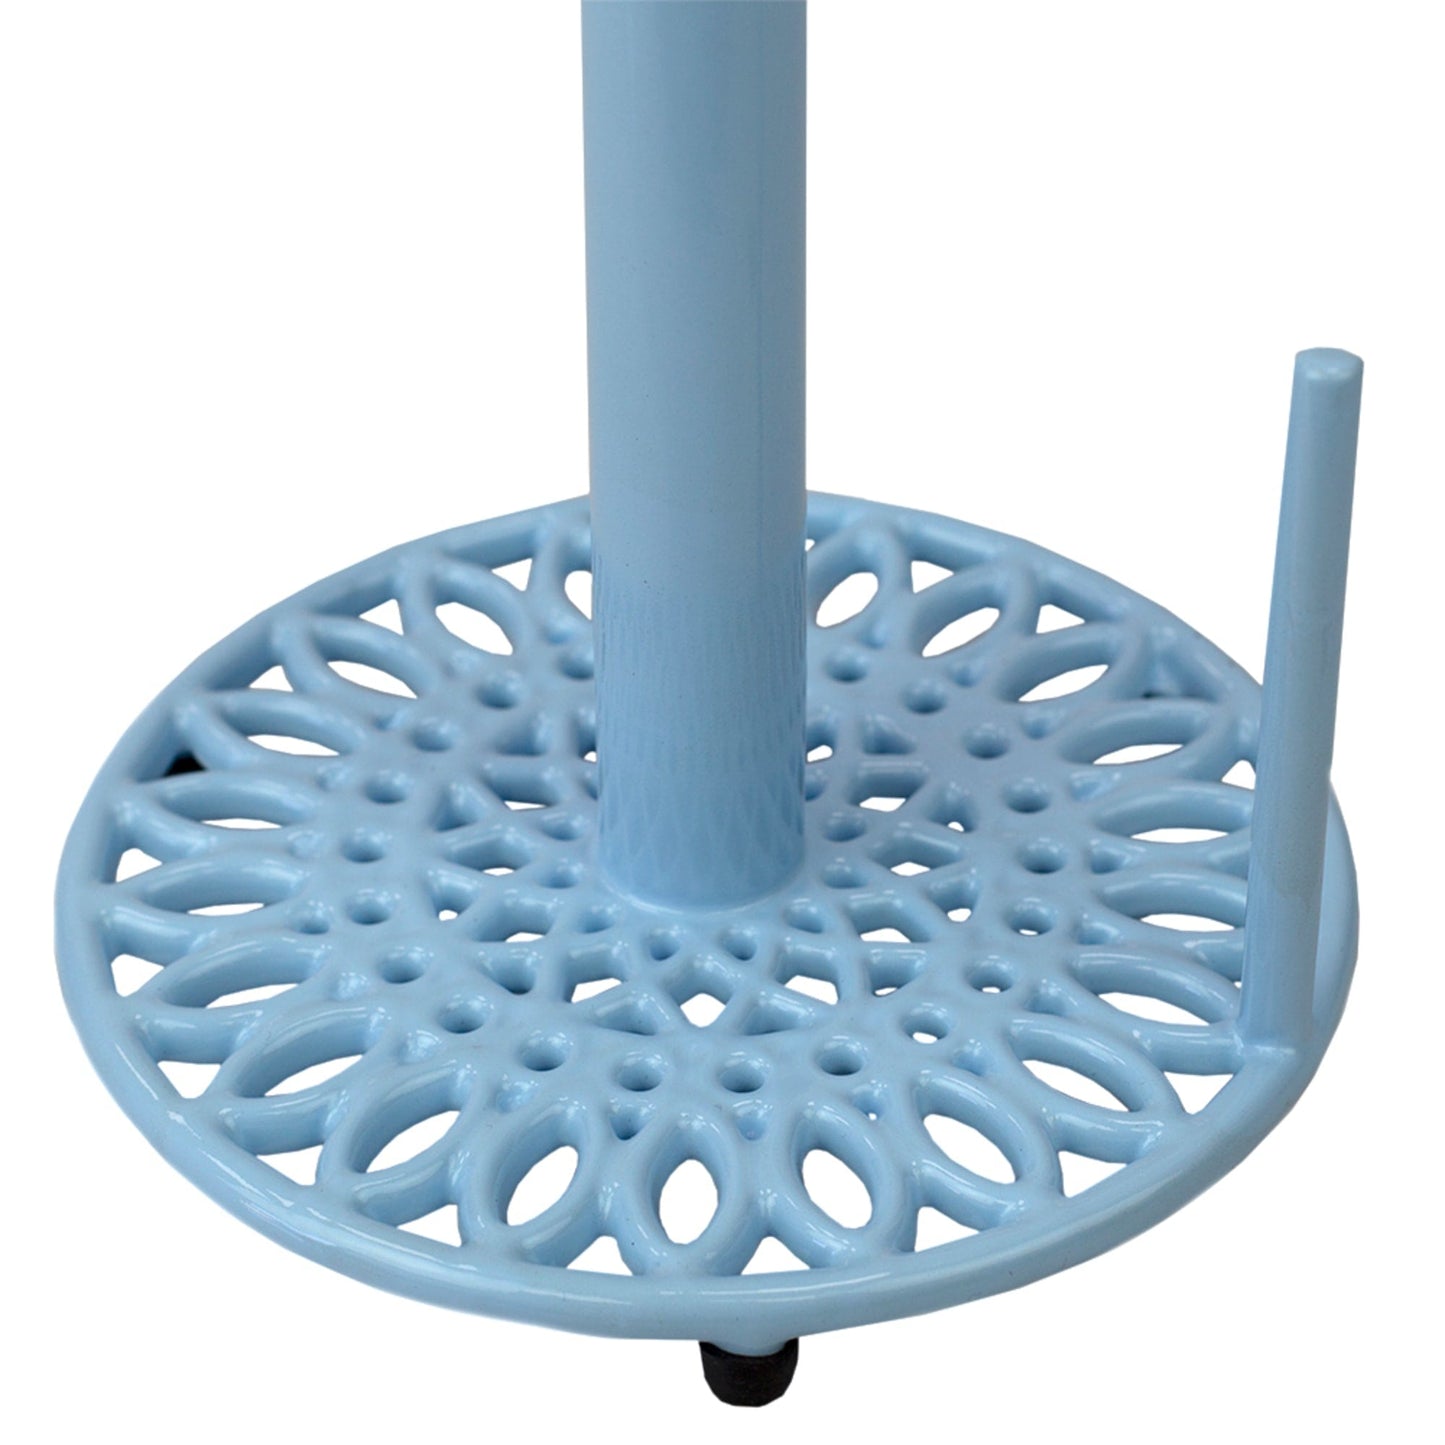 Sunflower Free-Standing Cast Iron Paper Towel Holder with Dispensing Side Bar, Blue